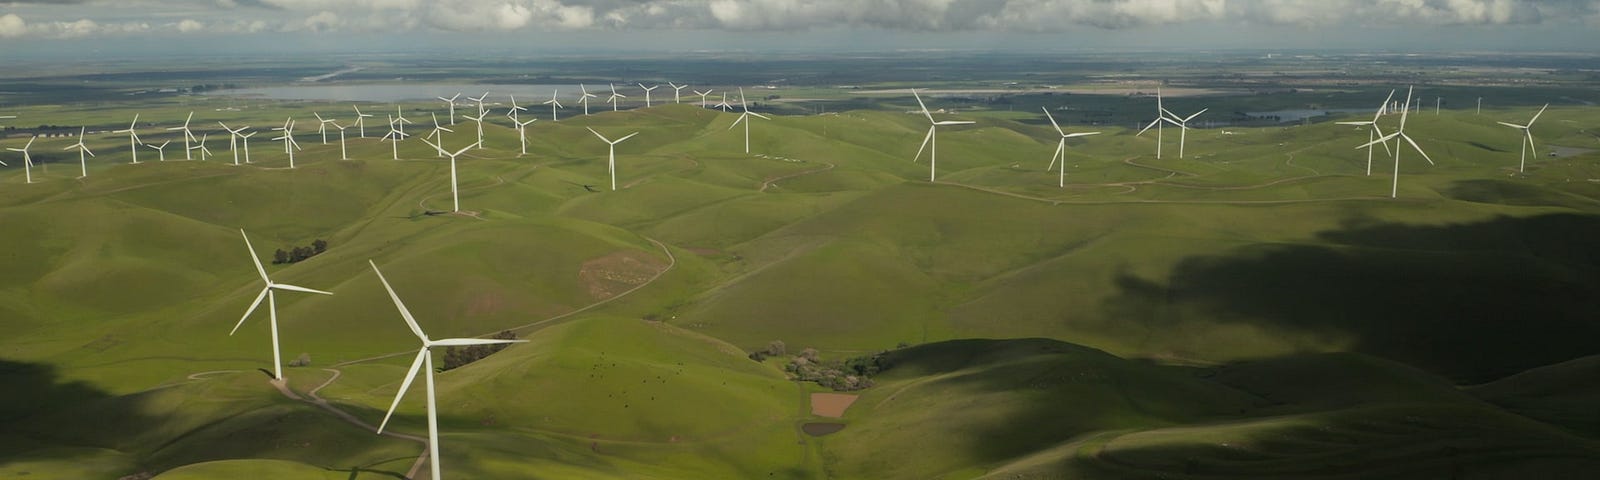 IMAGE: An aerial view of a vast green extension with many wind turbines installed